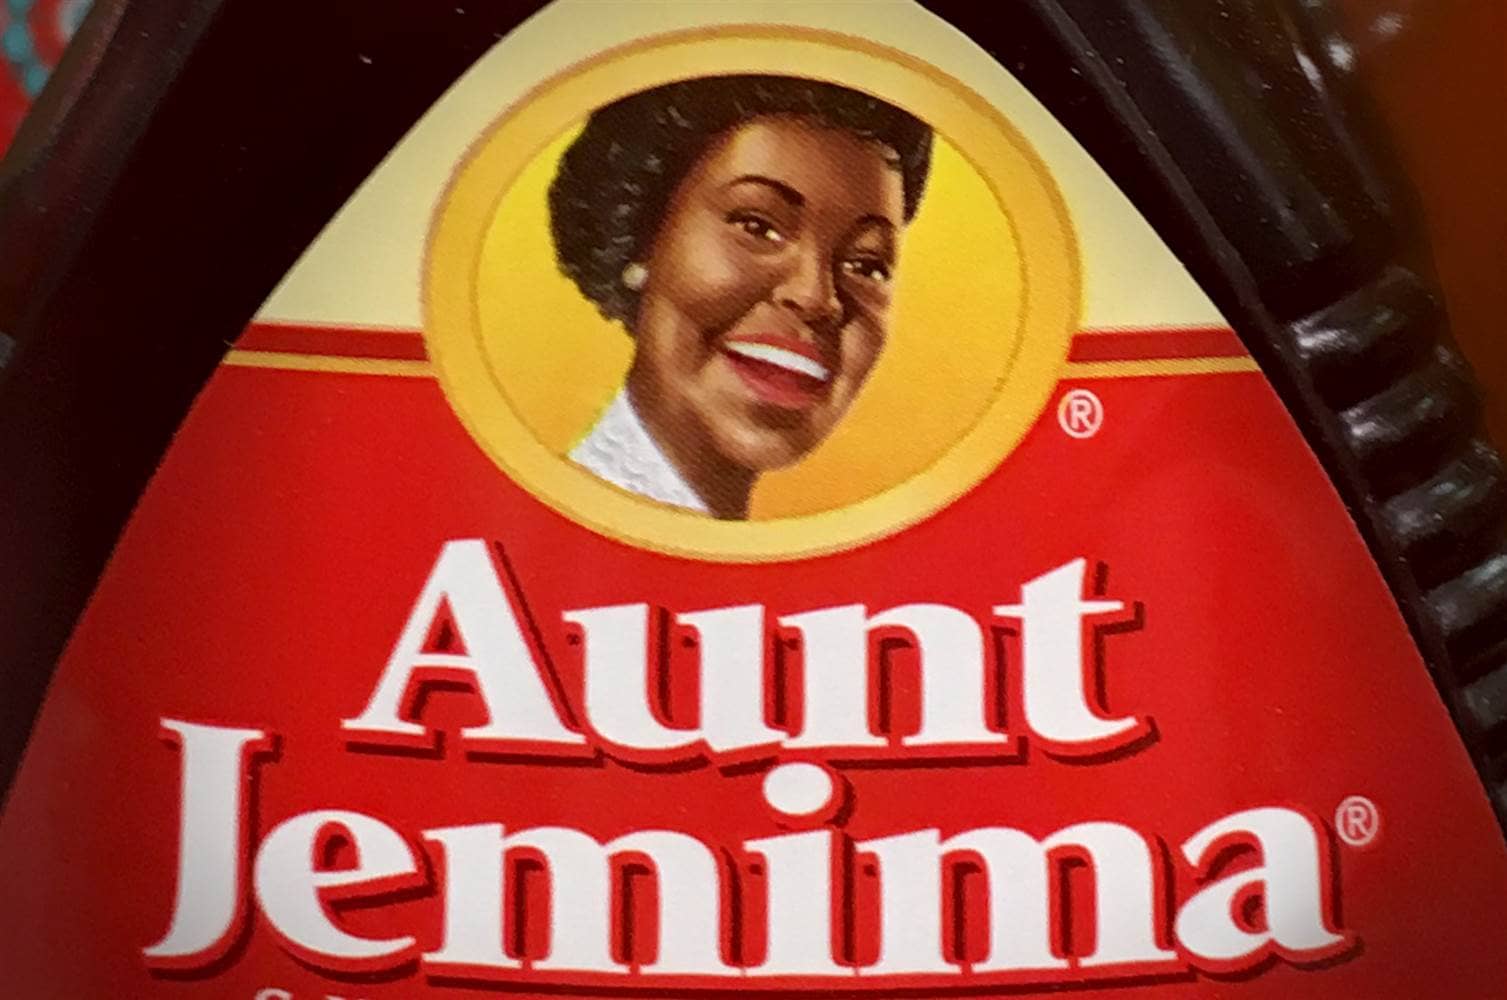 Aunt Jemima Frozen Foods Recalled Over Listeria Fears Image Courtesy of NBCNews.com